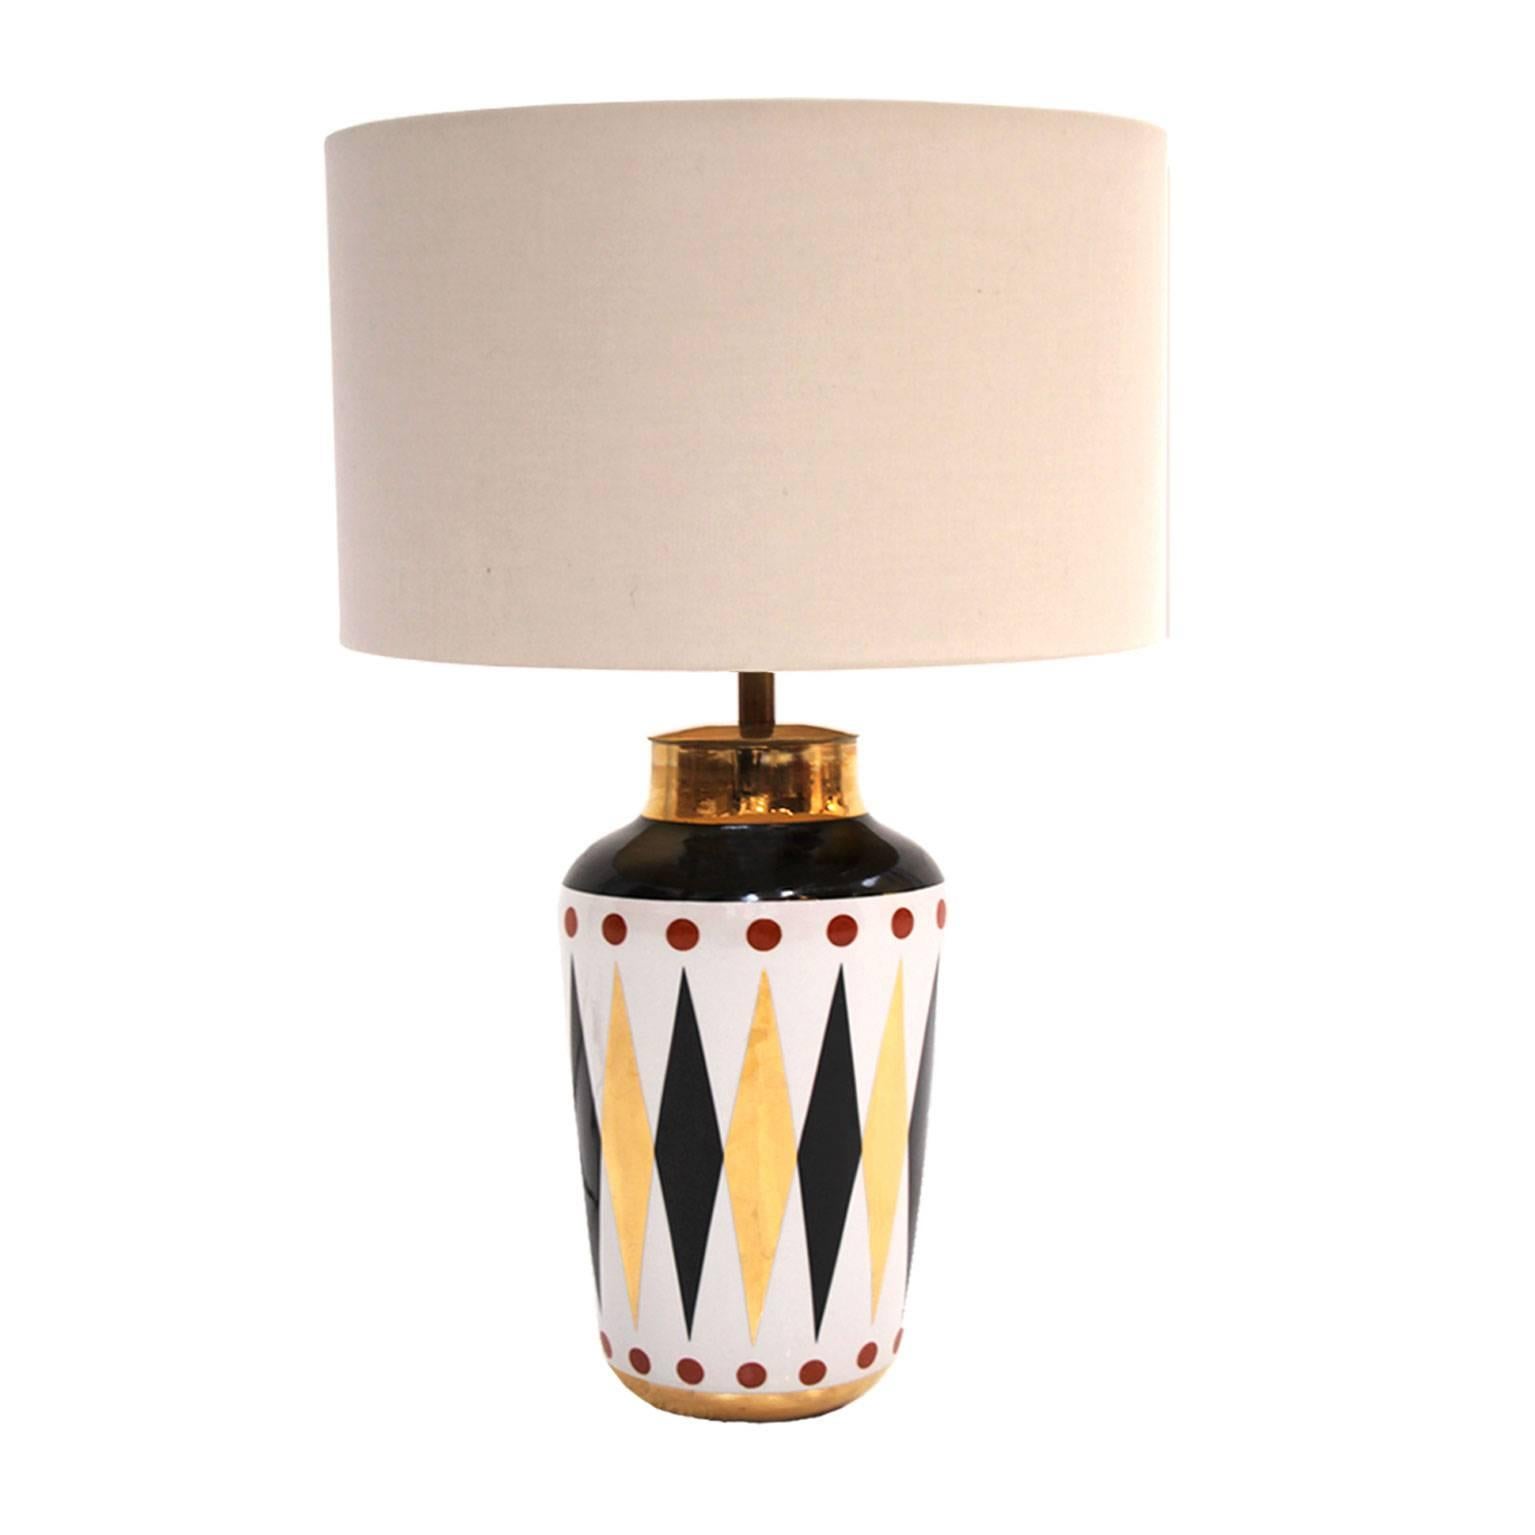 Pair of table lamps designed by Frederic de Lucas, made in porcelain and decorated with geometric patterns.